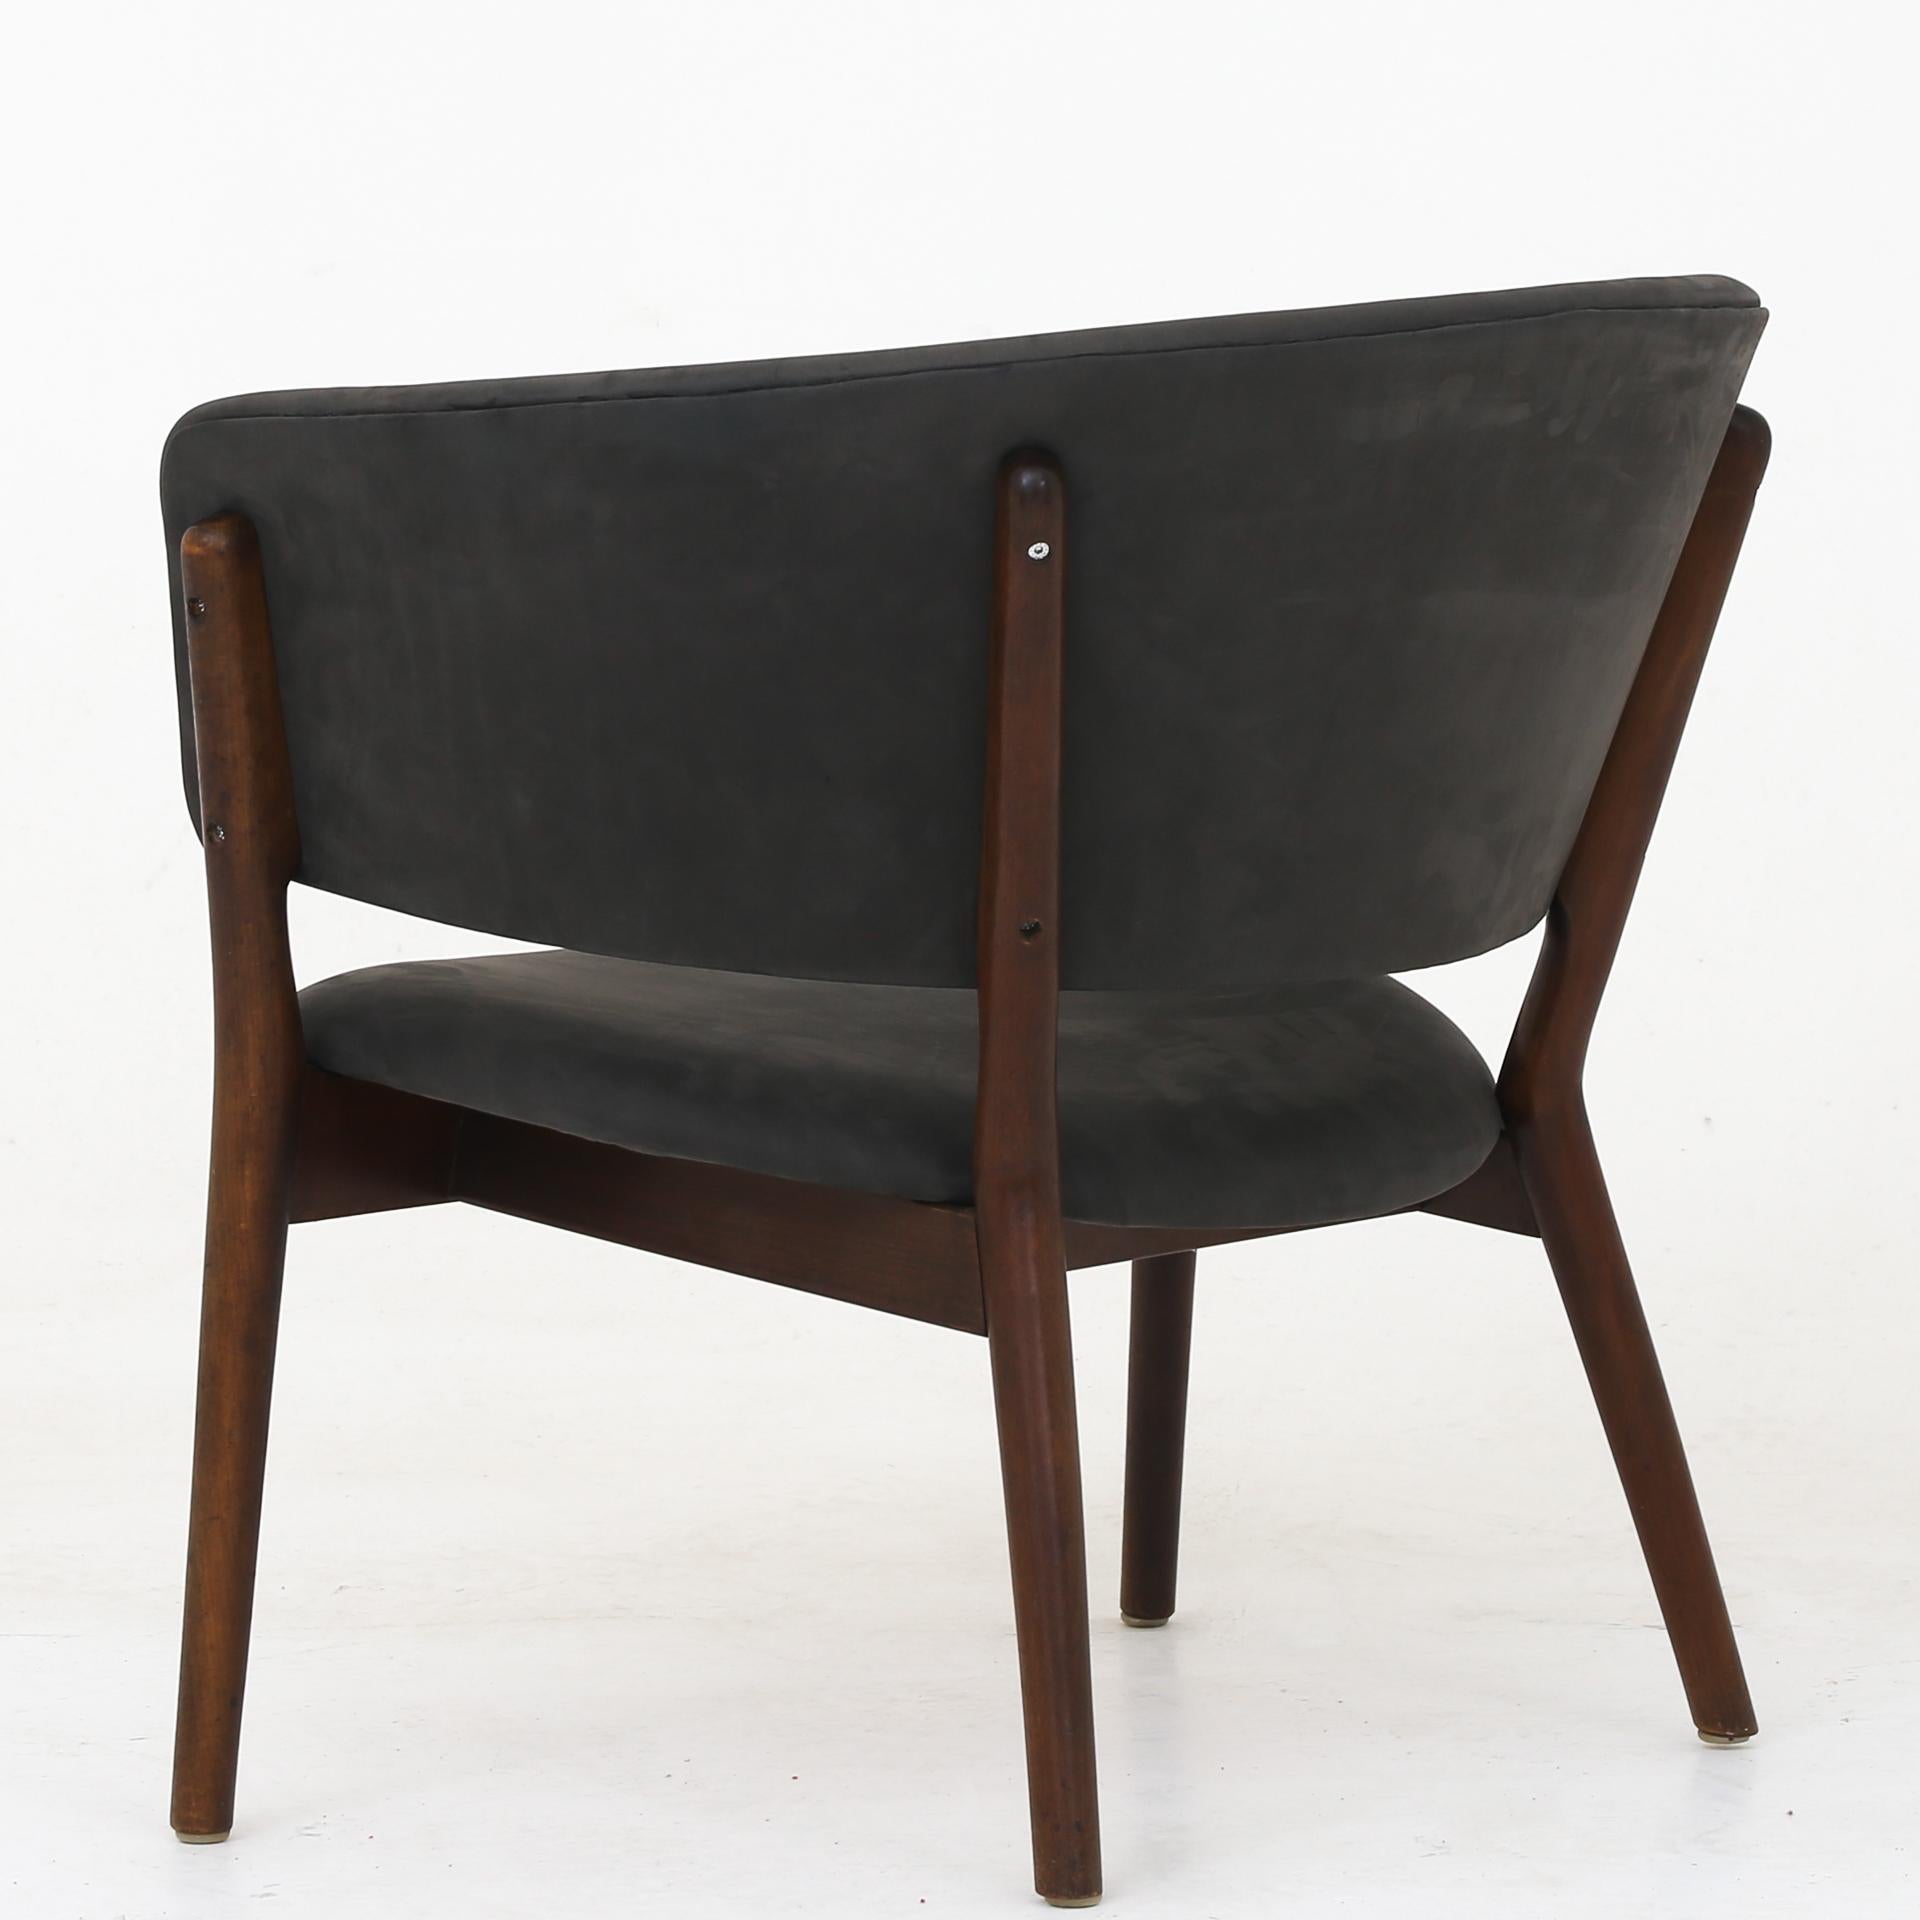 ND 83 - easy chair in Dunes grey leather and stained beech. Designed in 1952. Nanna Ditzel / Søren Willadsen.